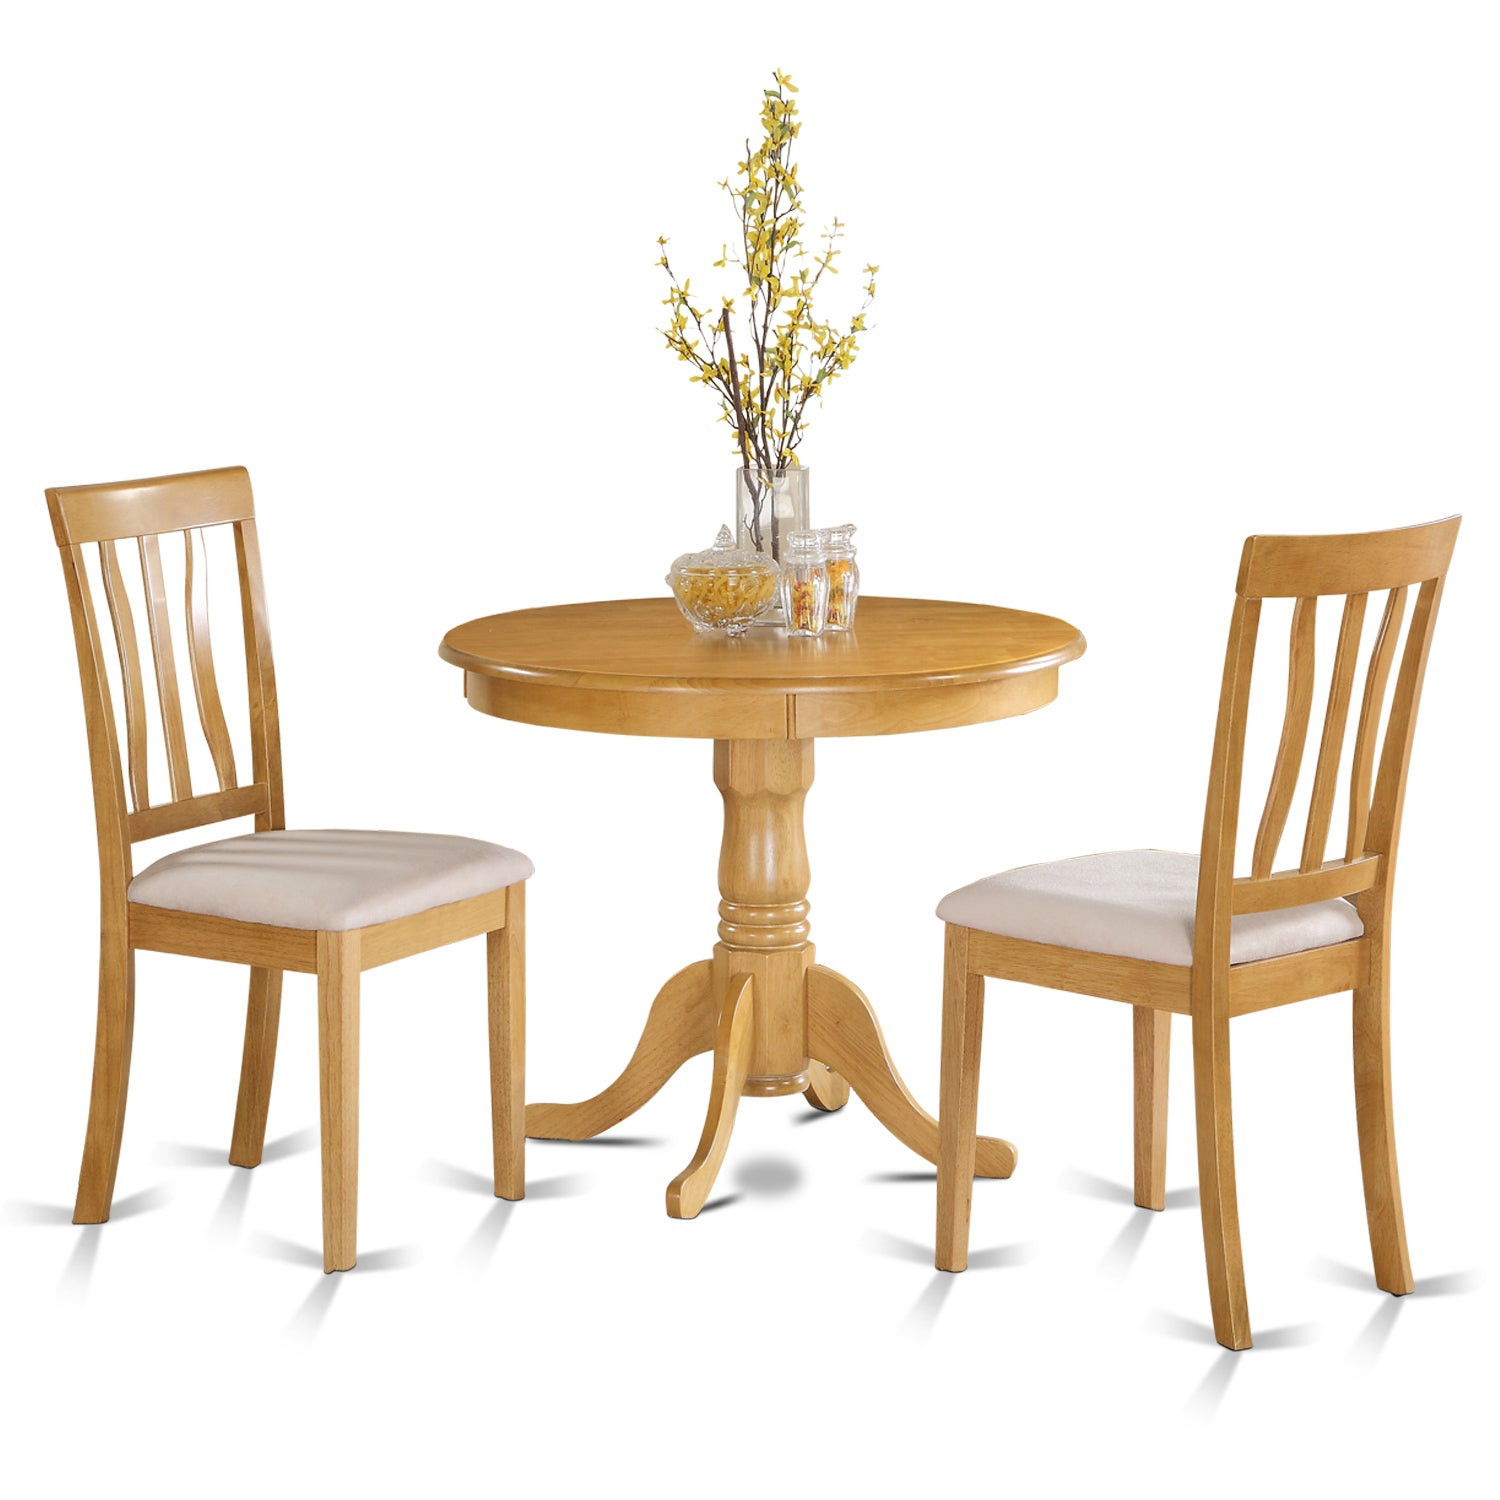 Small Kitchen Dinette Set
 Oak Small Kitchen Table Plus 2 Chairs 3 piece Dining Set